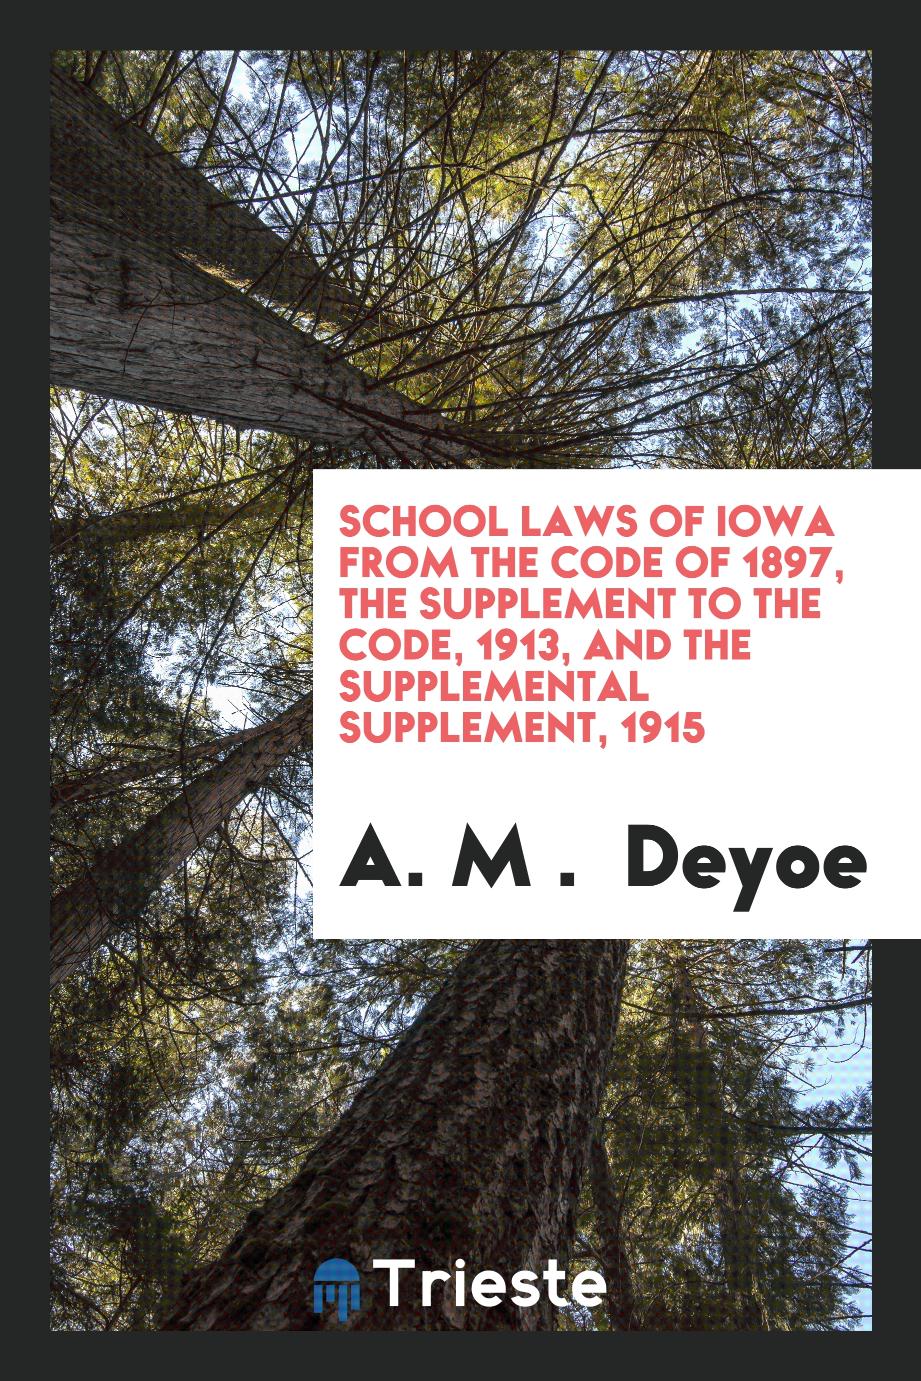 School Laws of Iowa from the Code of 1897, the Supplement to the Code, 1913, and the Supplemental Supplement, 1915